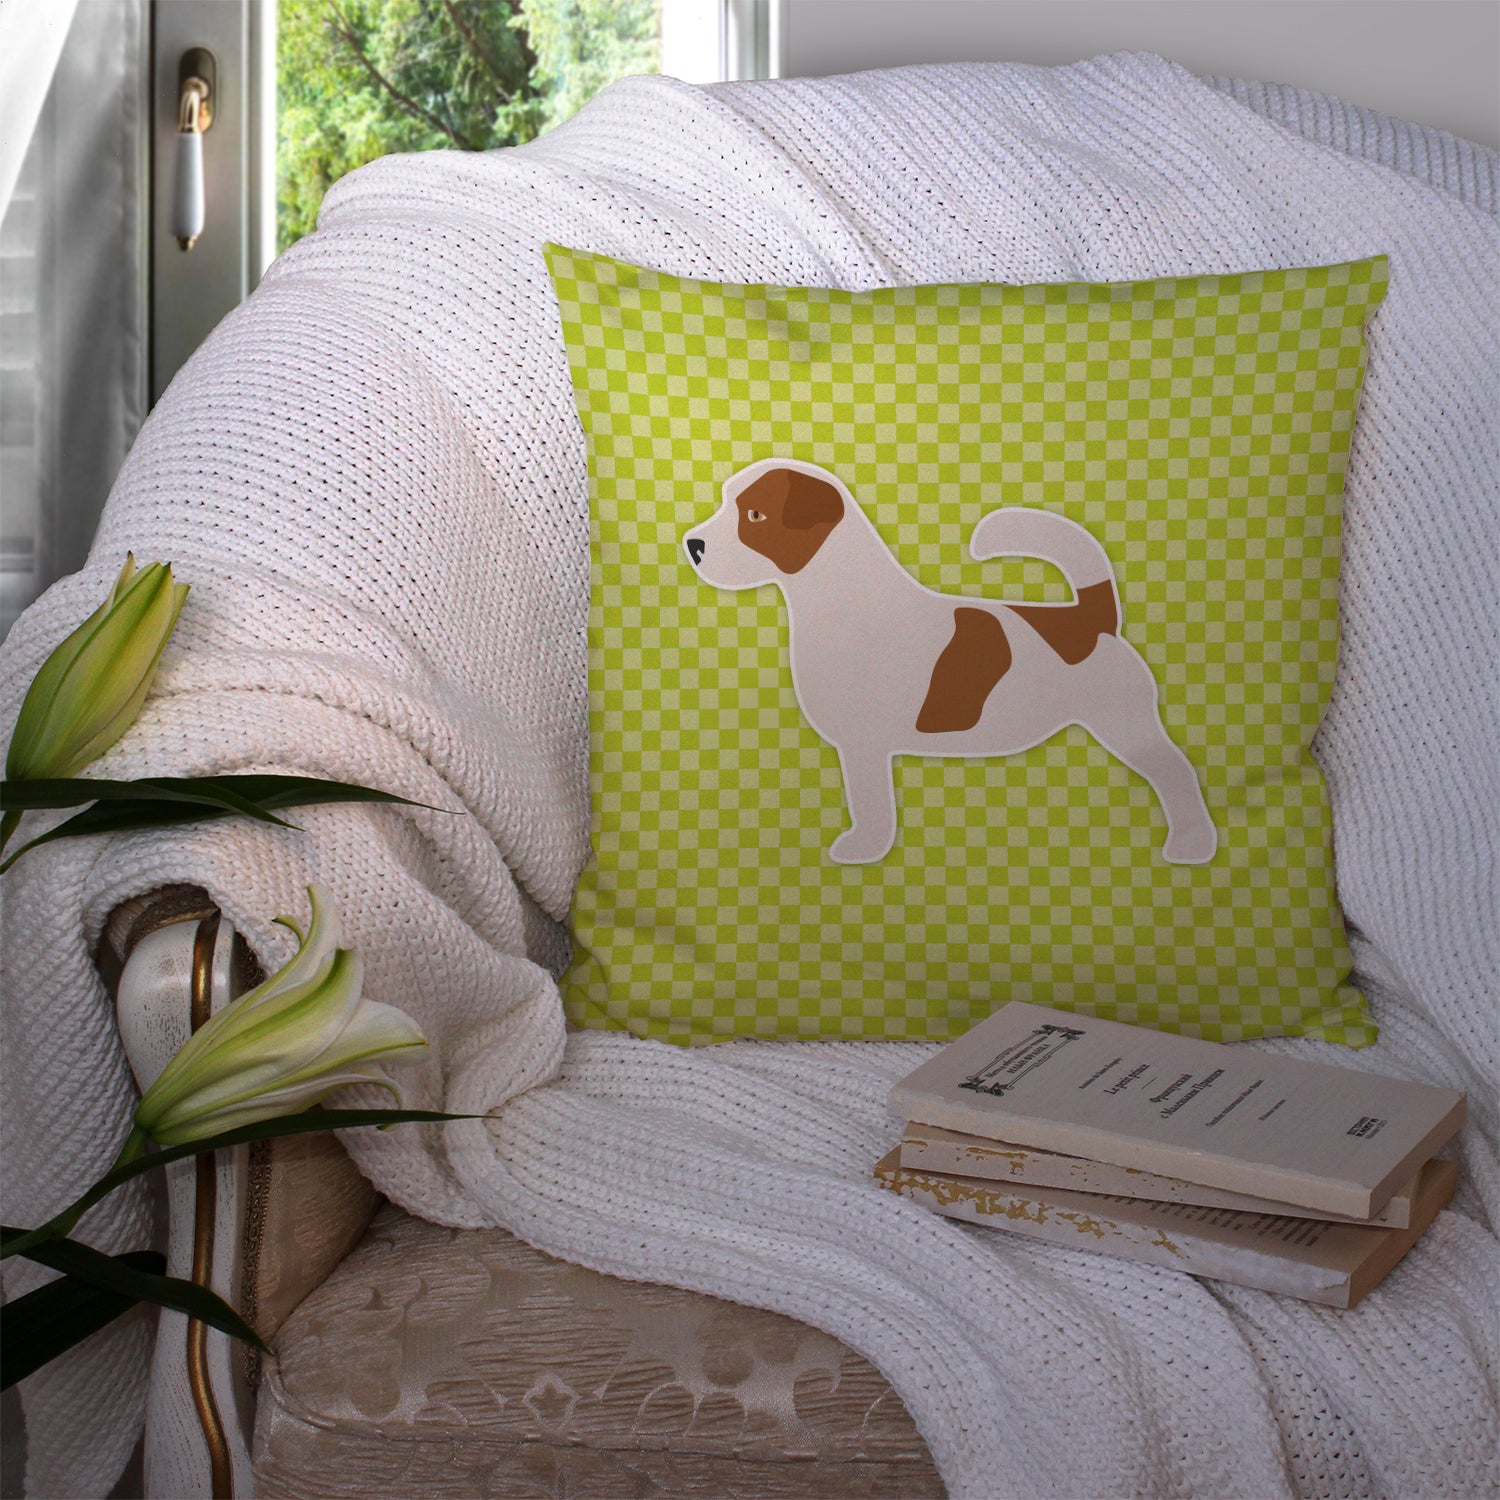 Jack Russell Terrier Checkerboard Green Fabric Decorative Pillow BB3807PW1414 - the-store.com